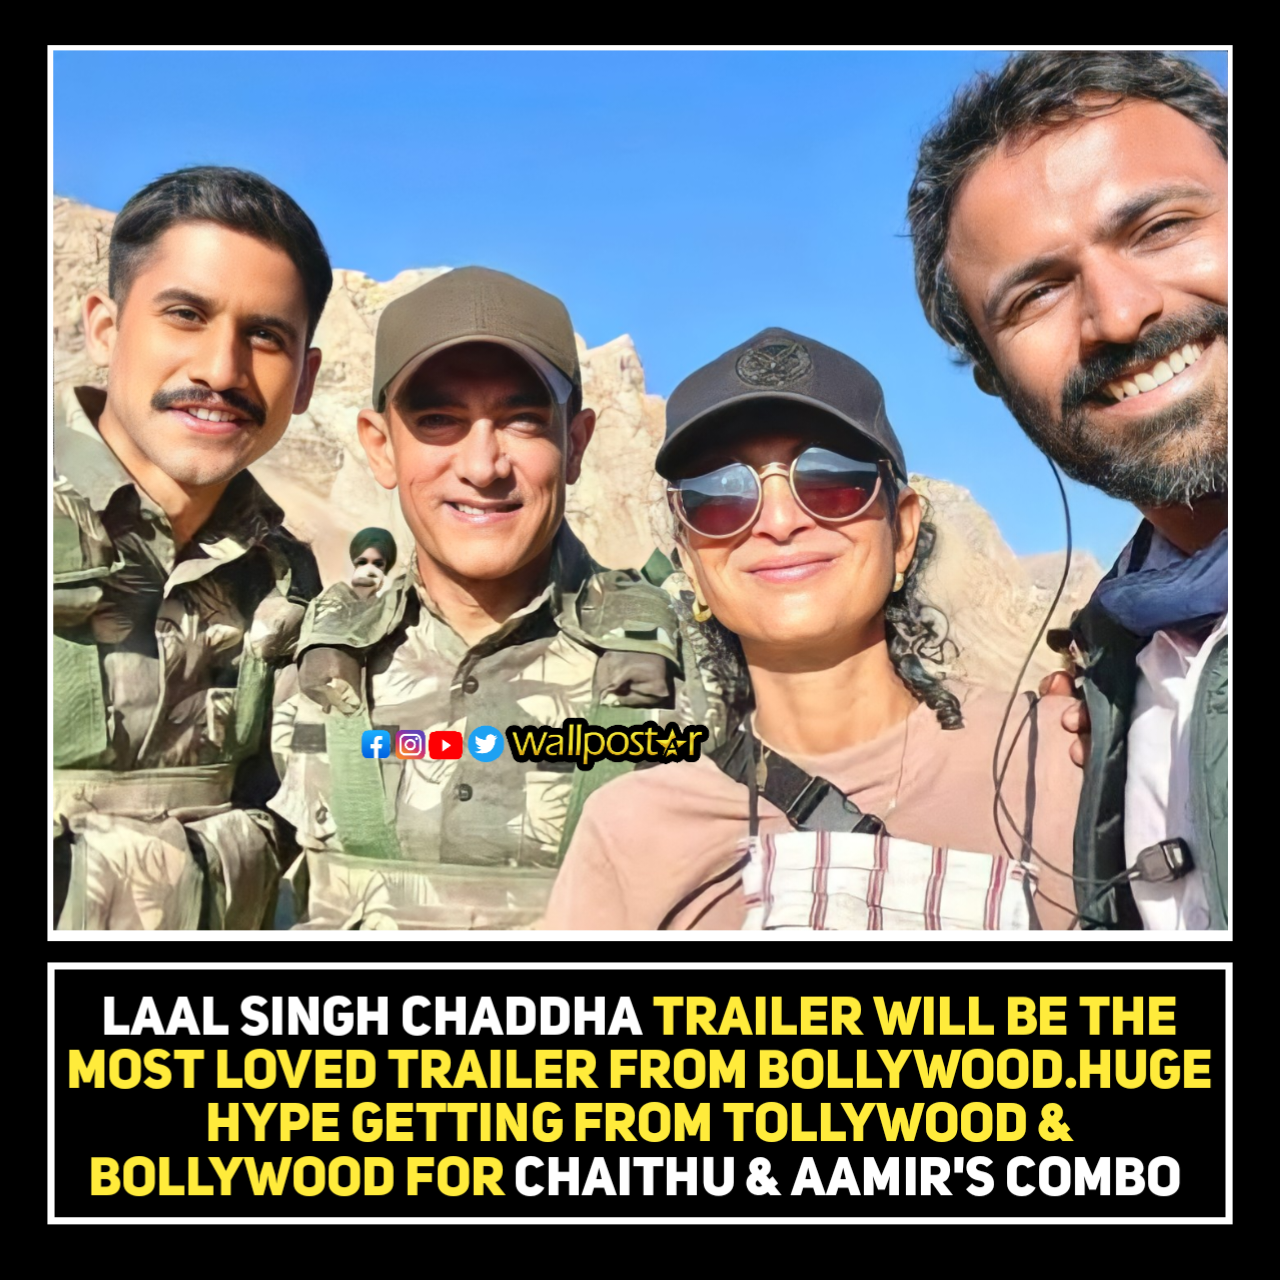 Hype Getting for Chaithu and Aamir's Combo